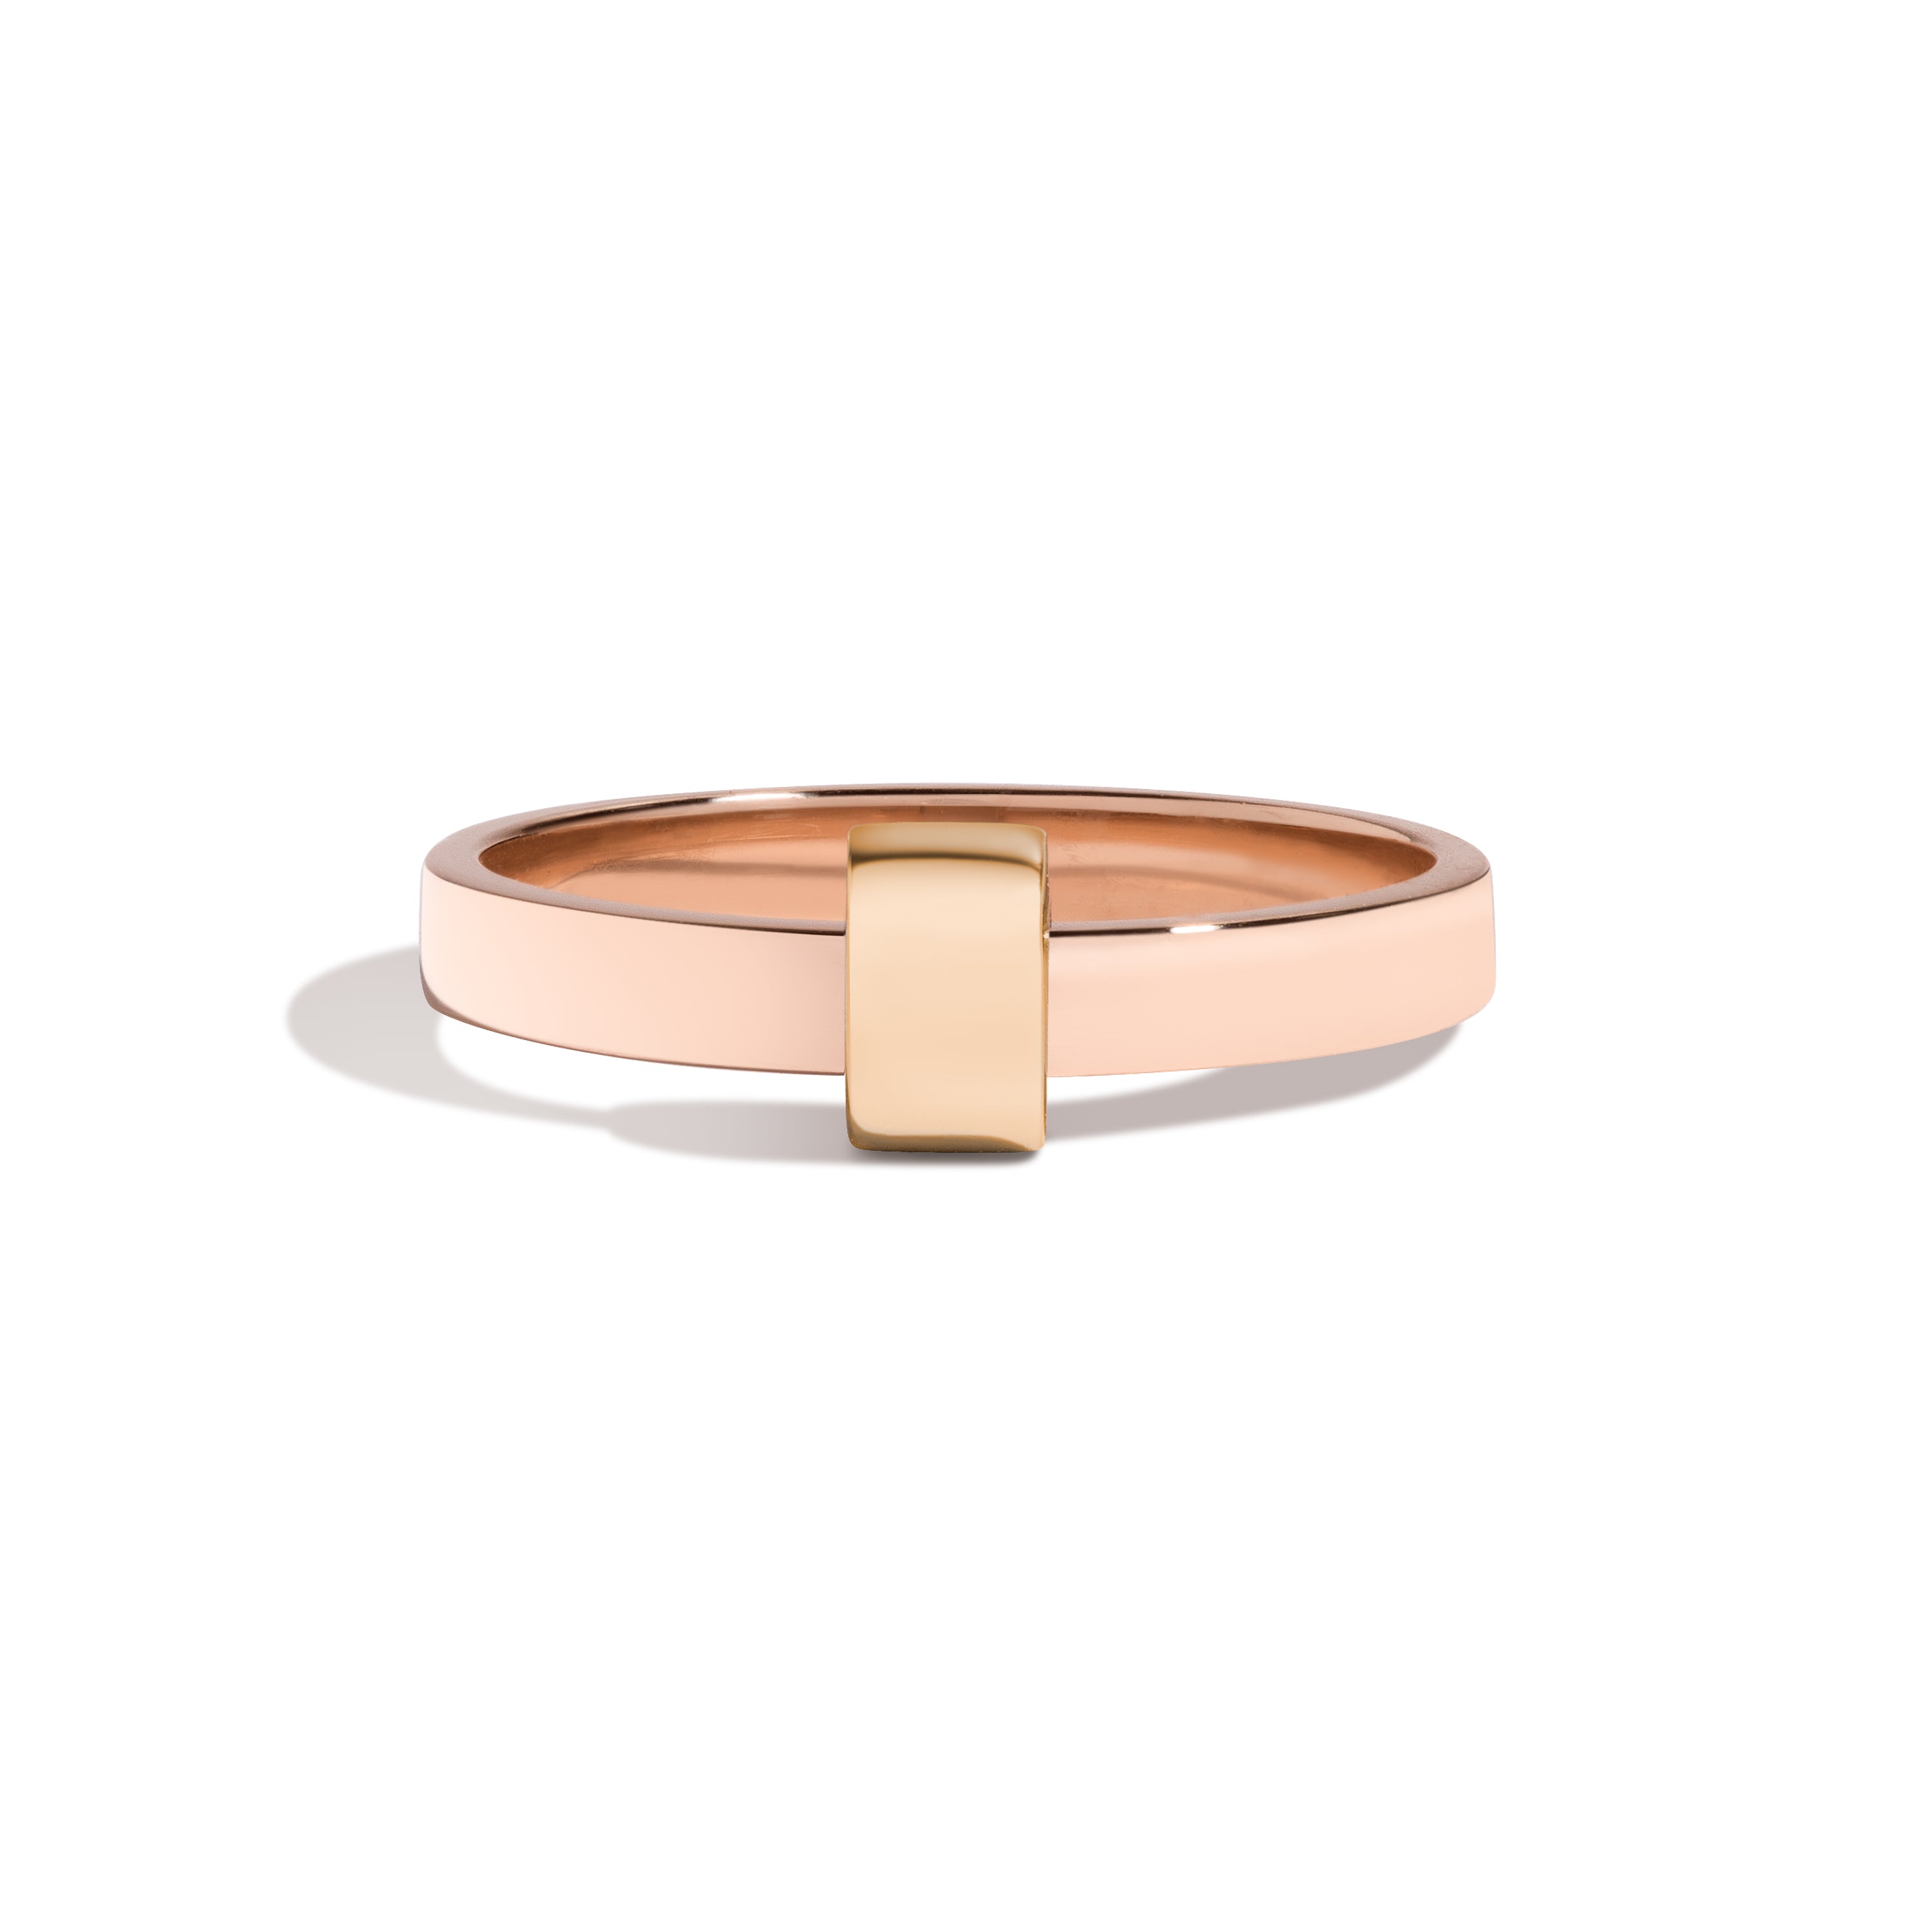 Shahla Karimi Joon Signature 14K Rose Gold 3mm Band With 14K Yellow Gold  Wrap